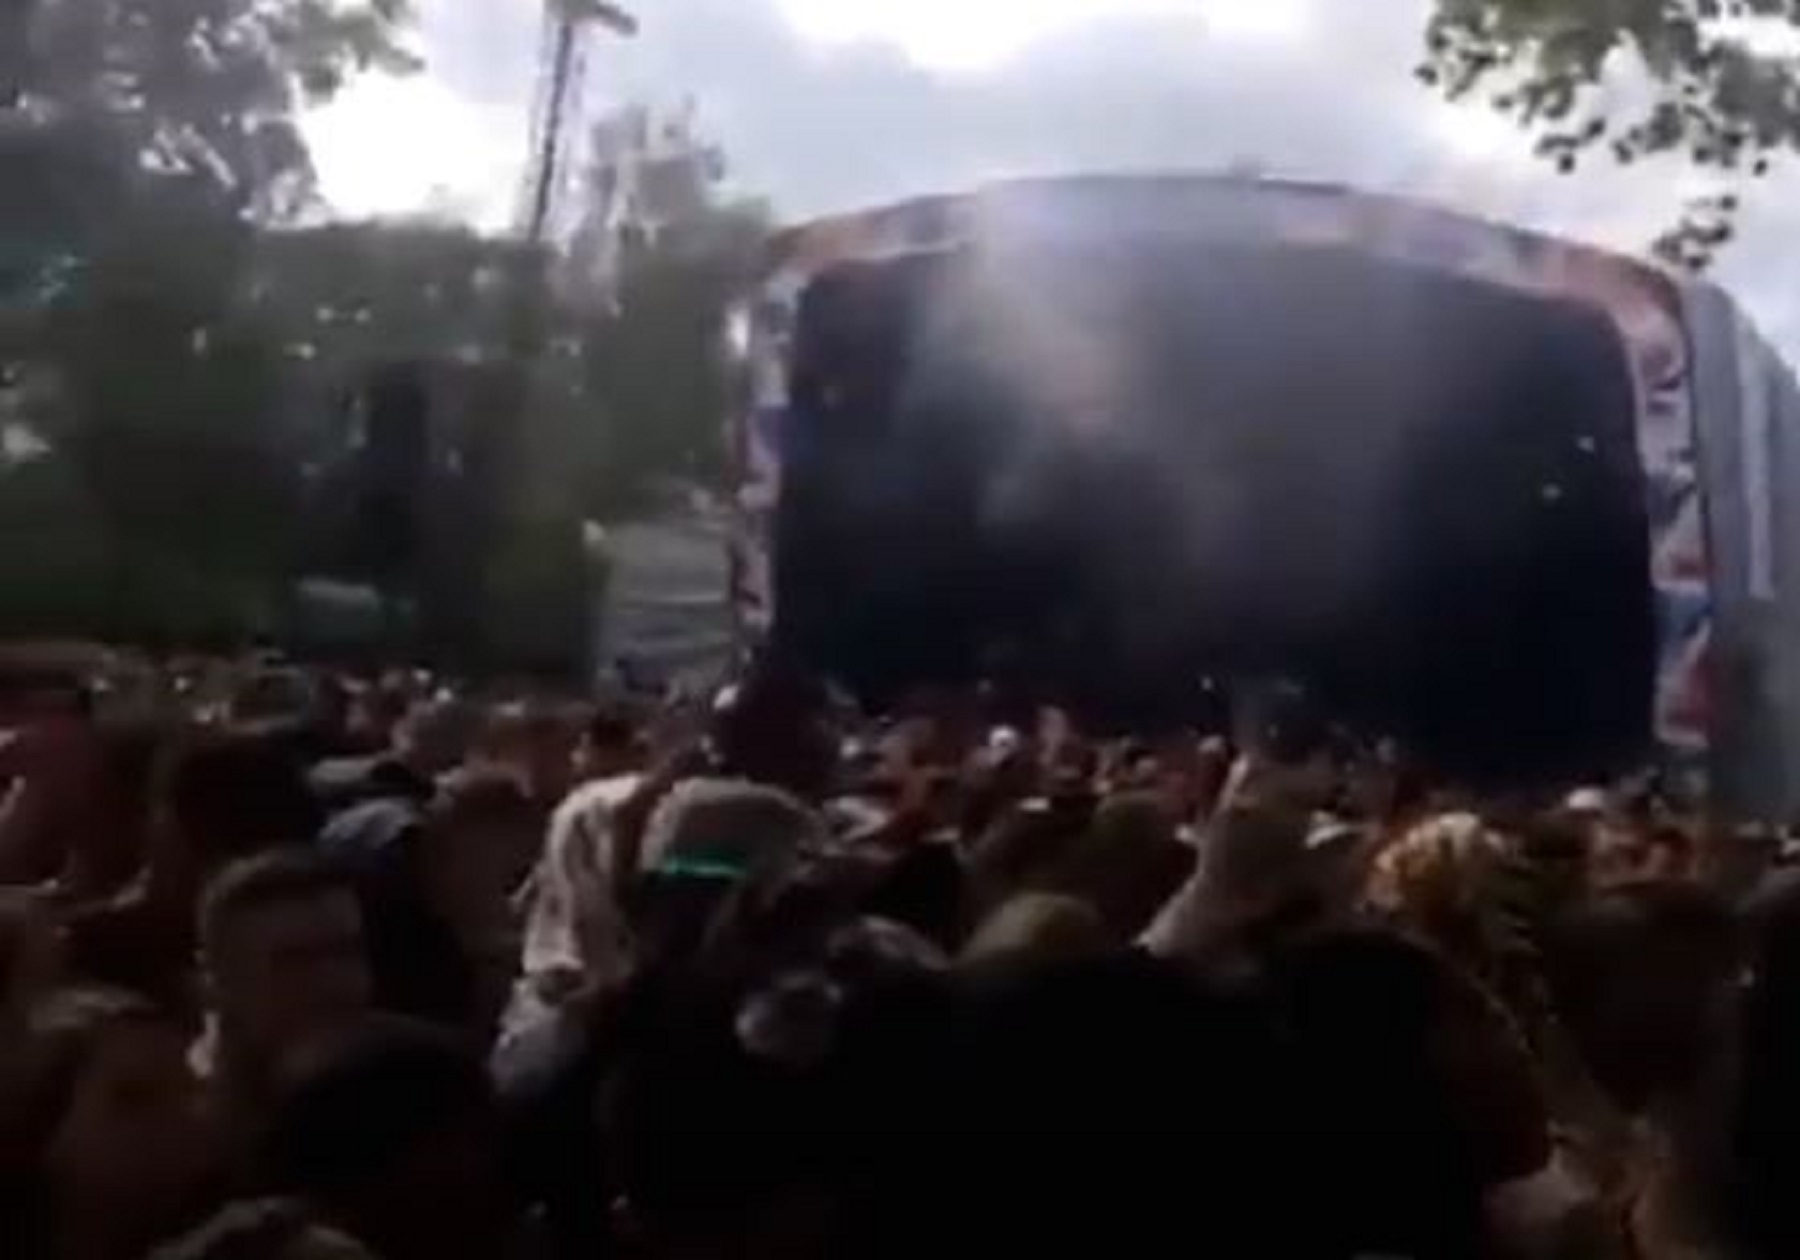 Wireless Festival fans complain of overcrowding and safety fears